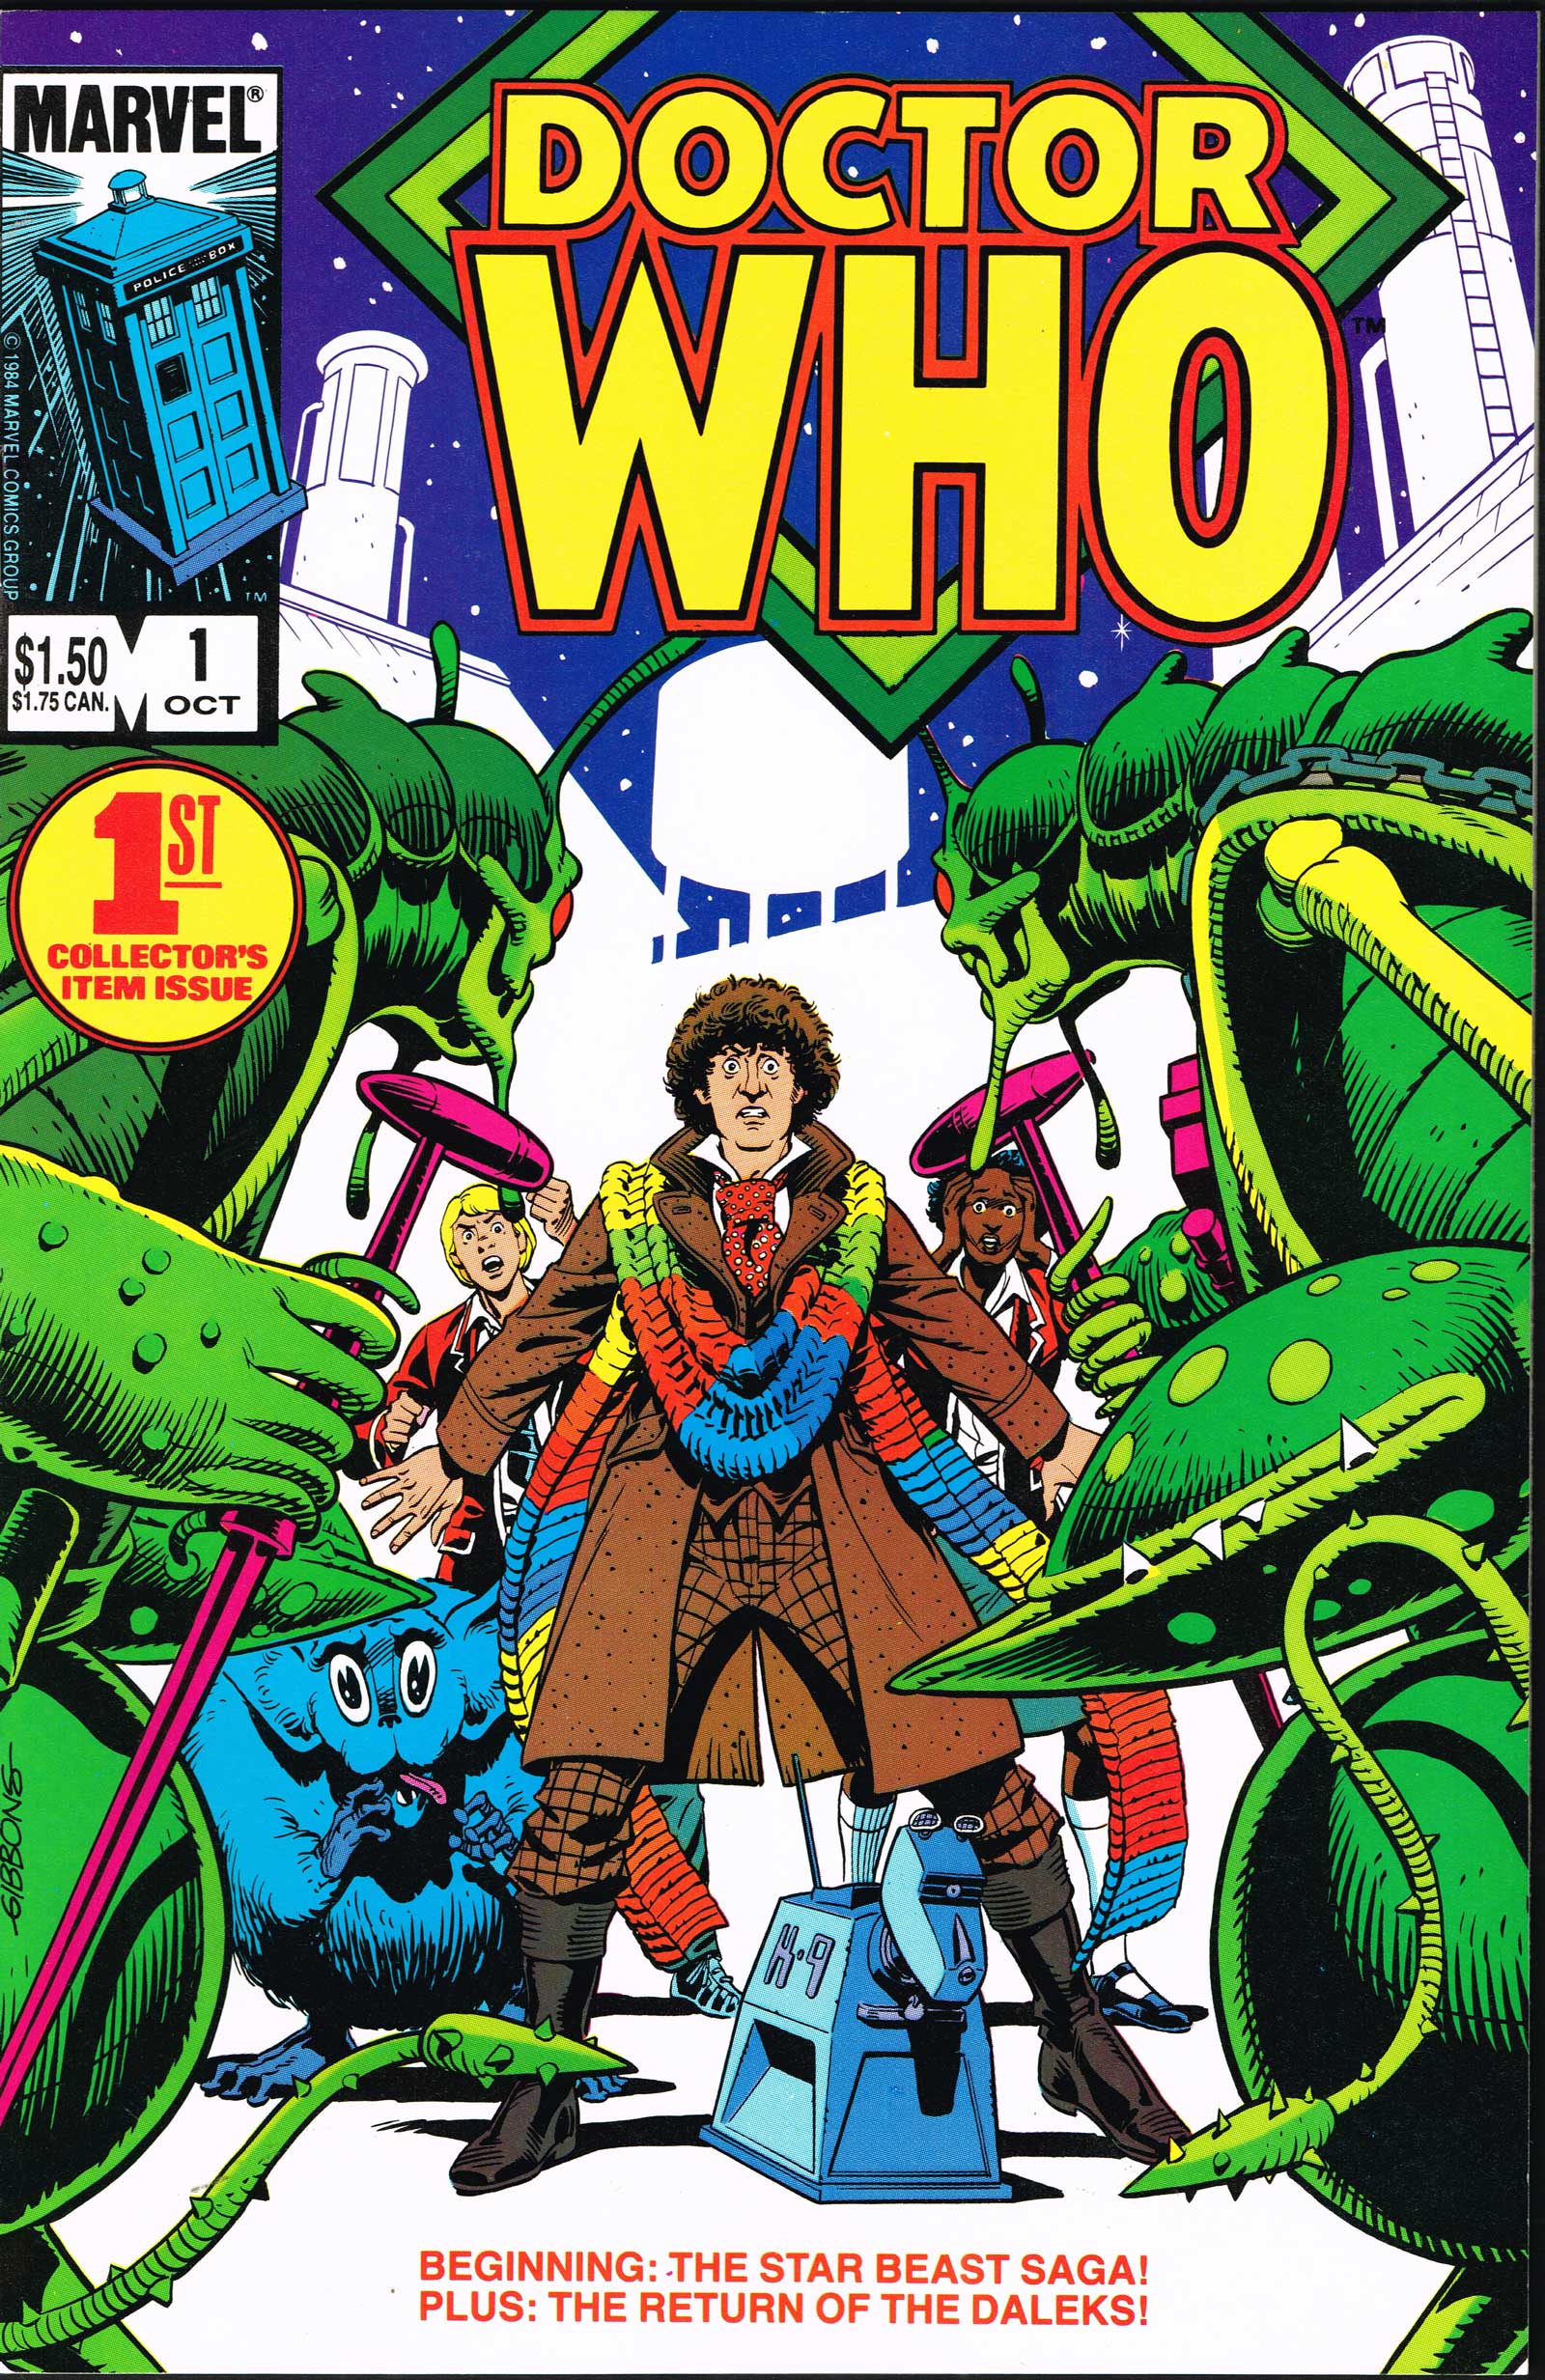 "The Star Beast" was the first story to run in Marvel Comics colour reprint of the Doctor Who Weekly strips when the title launched in the United States in 1984. Earlier stories appeared in issues of Marvel Premiere. Cover art by Dave Gibbons